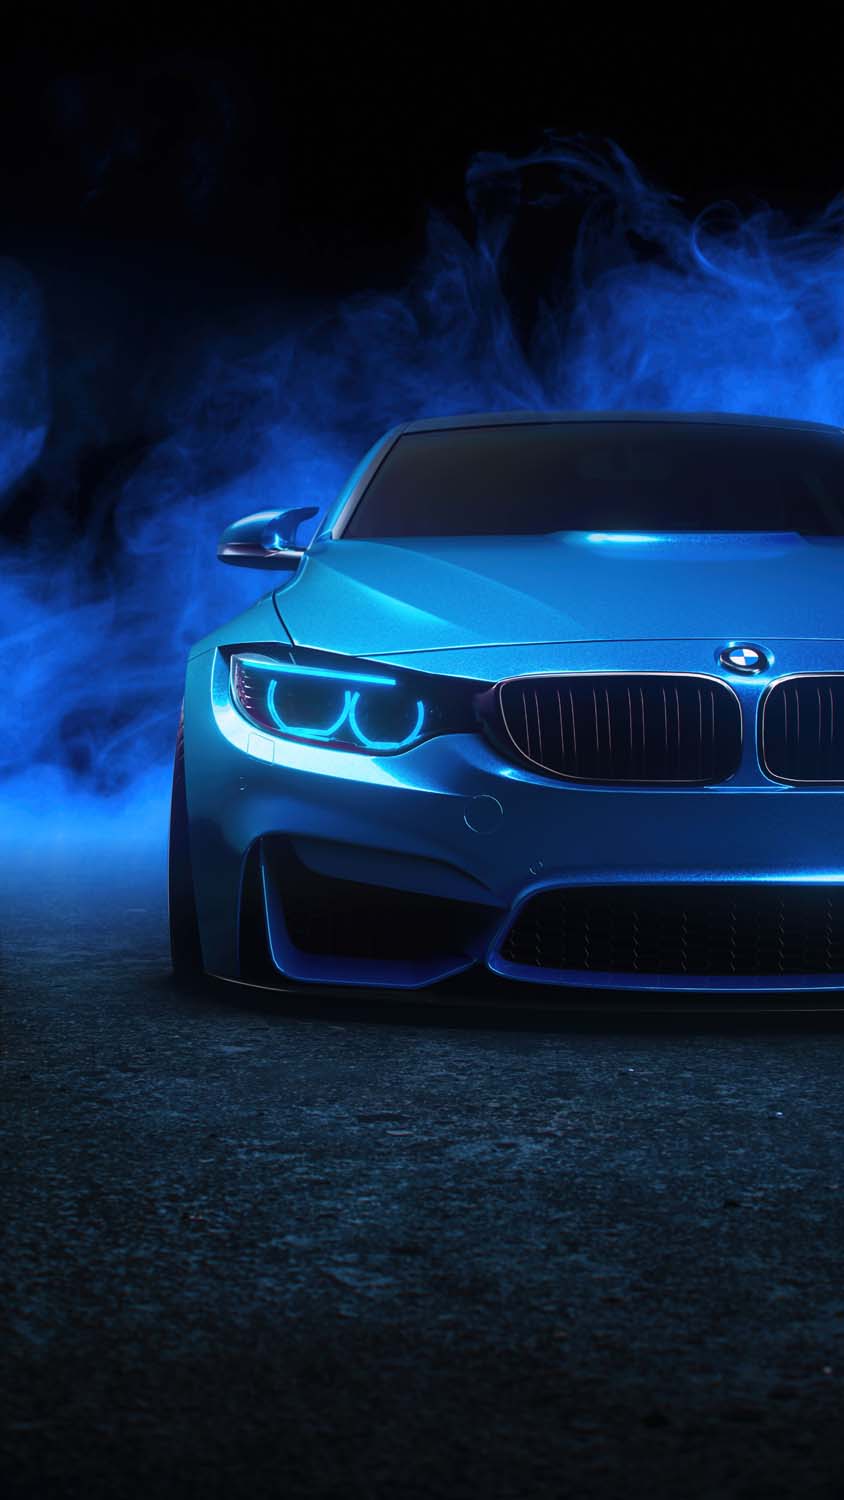 BMW Blue IPhone Wallpaper HD - IPhone Wallpapers : iPhone Wallpapers